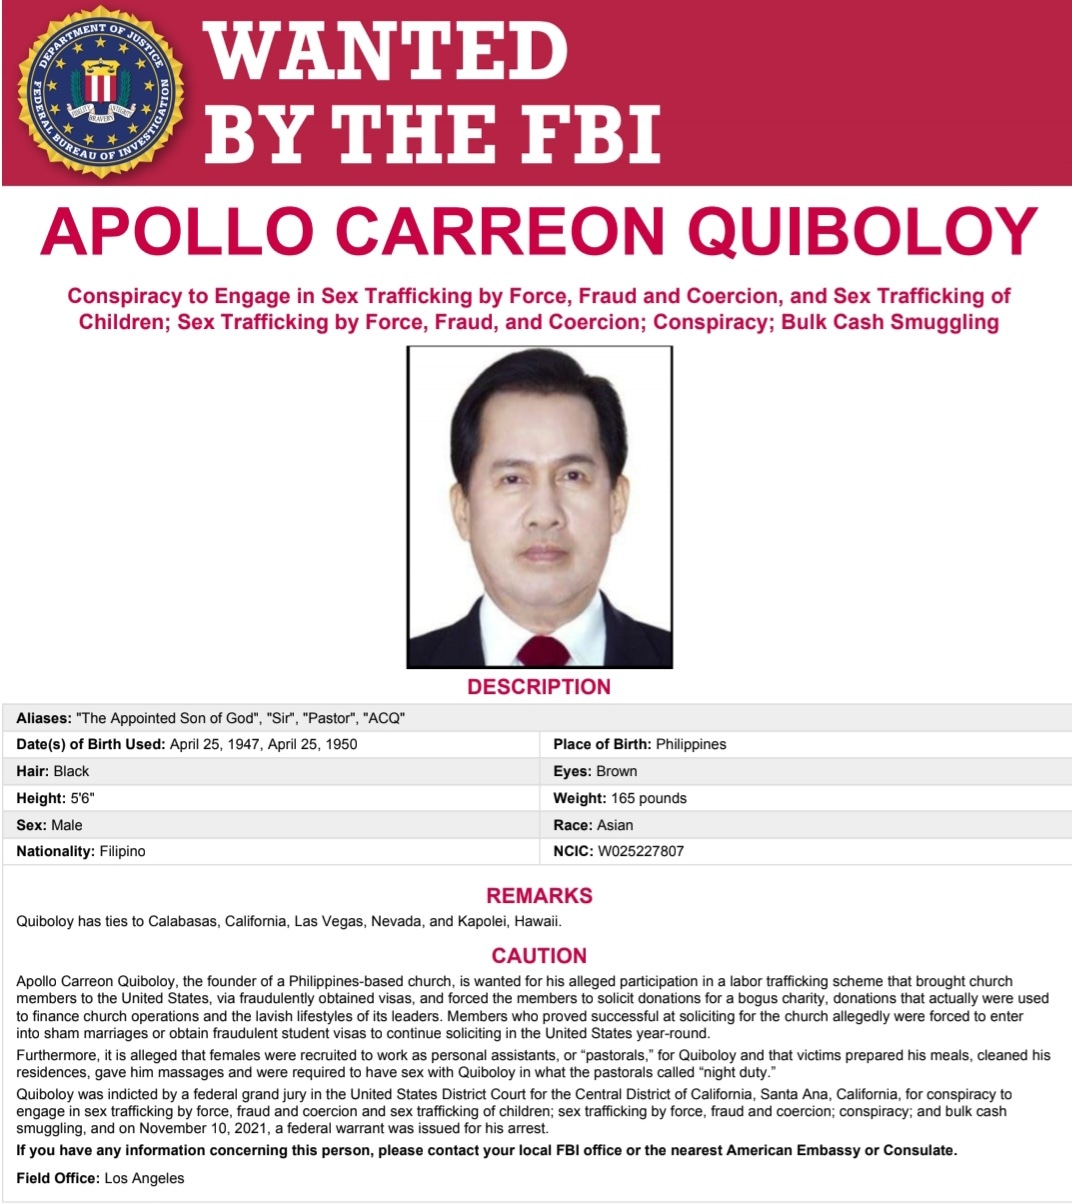 Quiboloy: Wanted by the FBI